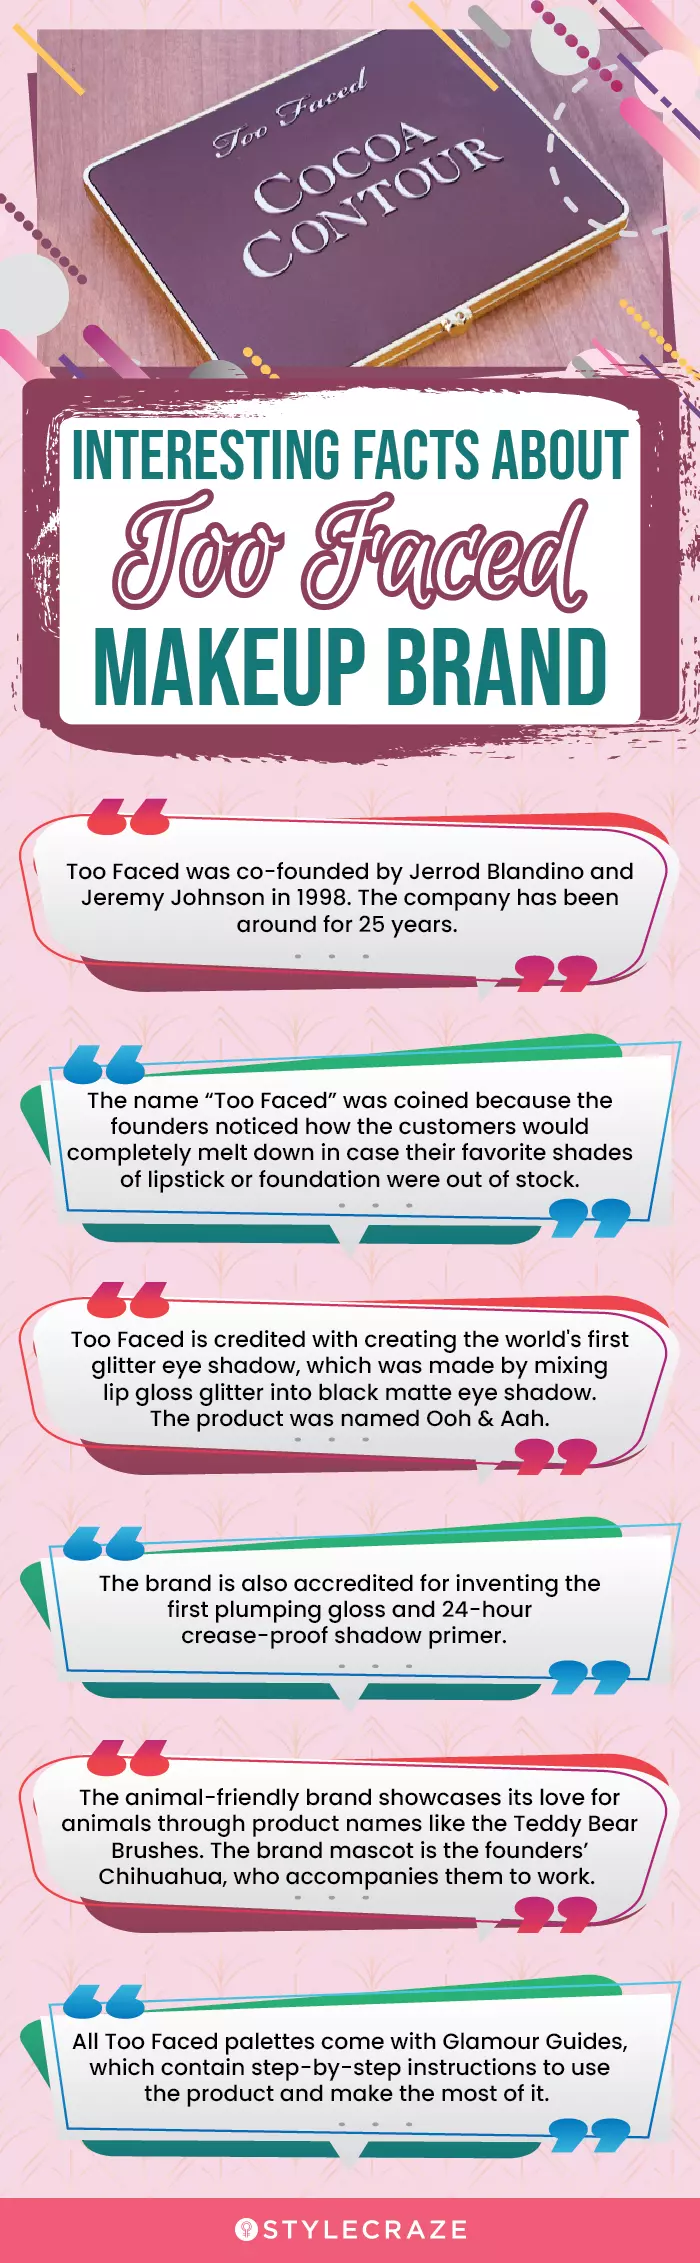 Interesting Facts About Too Faced Makeup Brand (infographic)